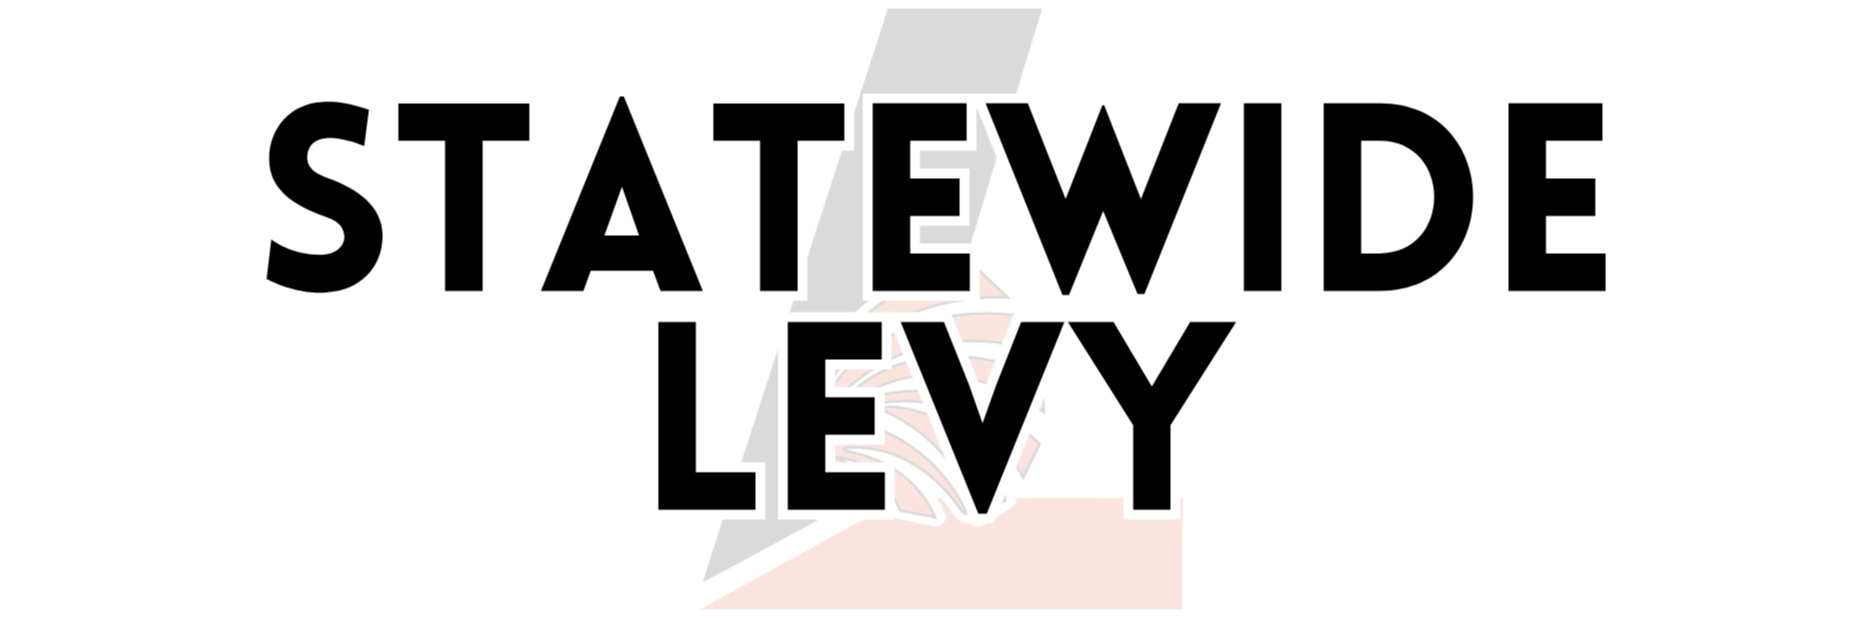 statewide levy